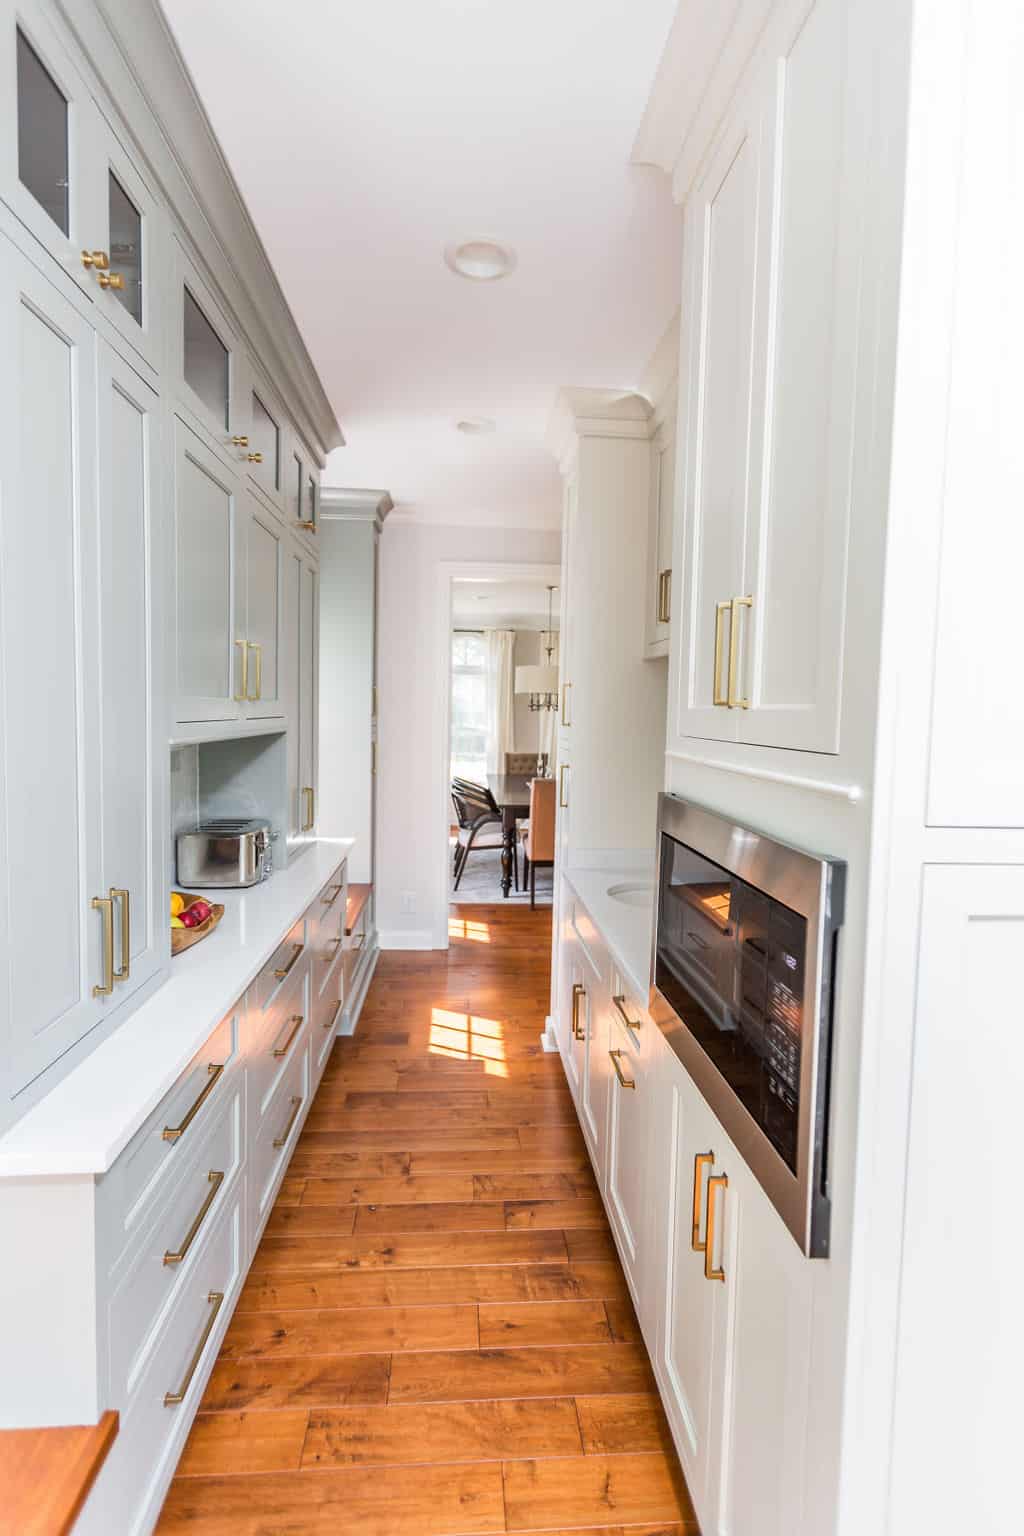 Nicholas Design Build | A kitchen remodel with white cabinets and wood floors.